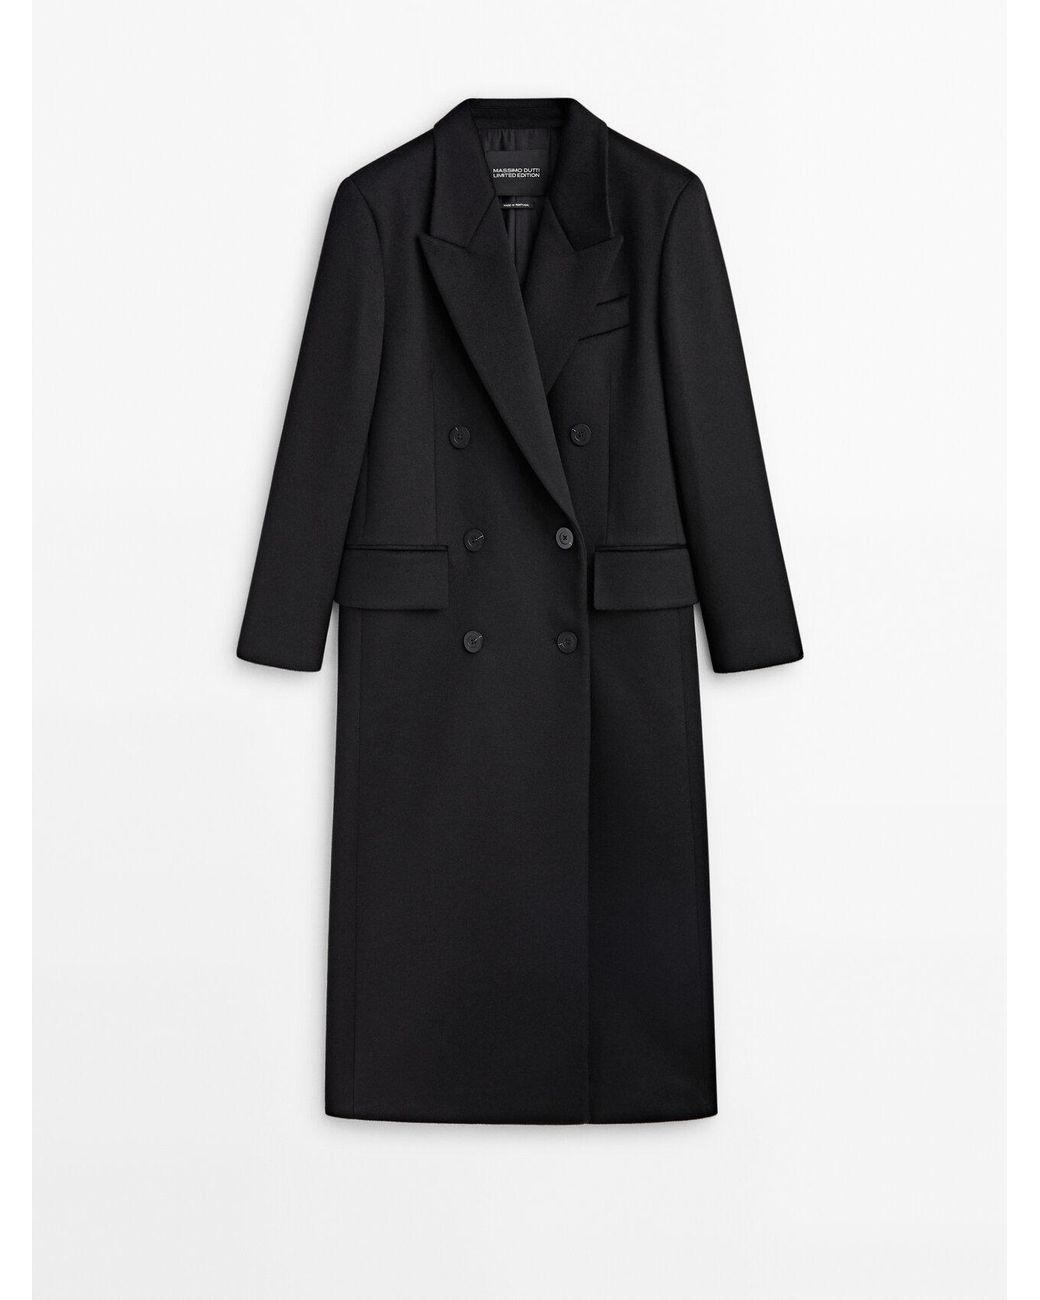 MASSIMO DUTTI Longline Double-Breasted Coat in Black | Lyst